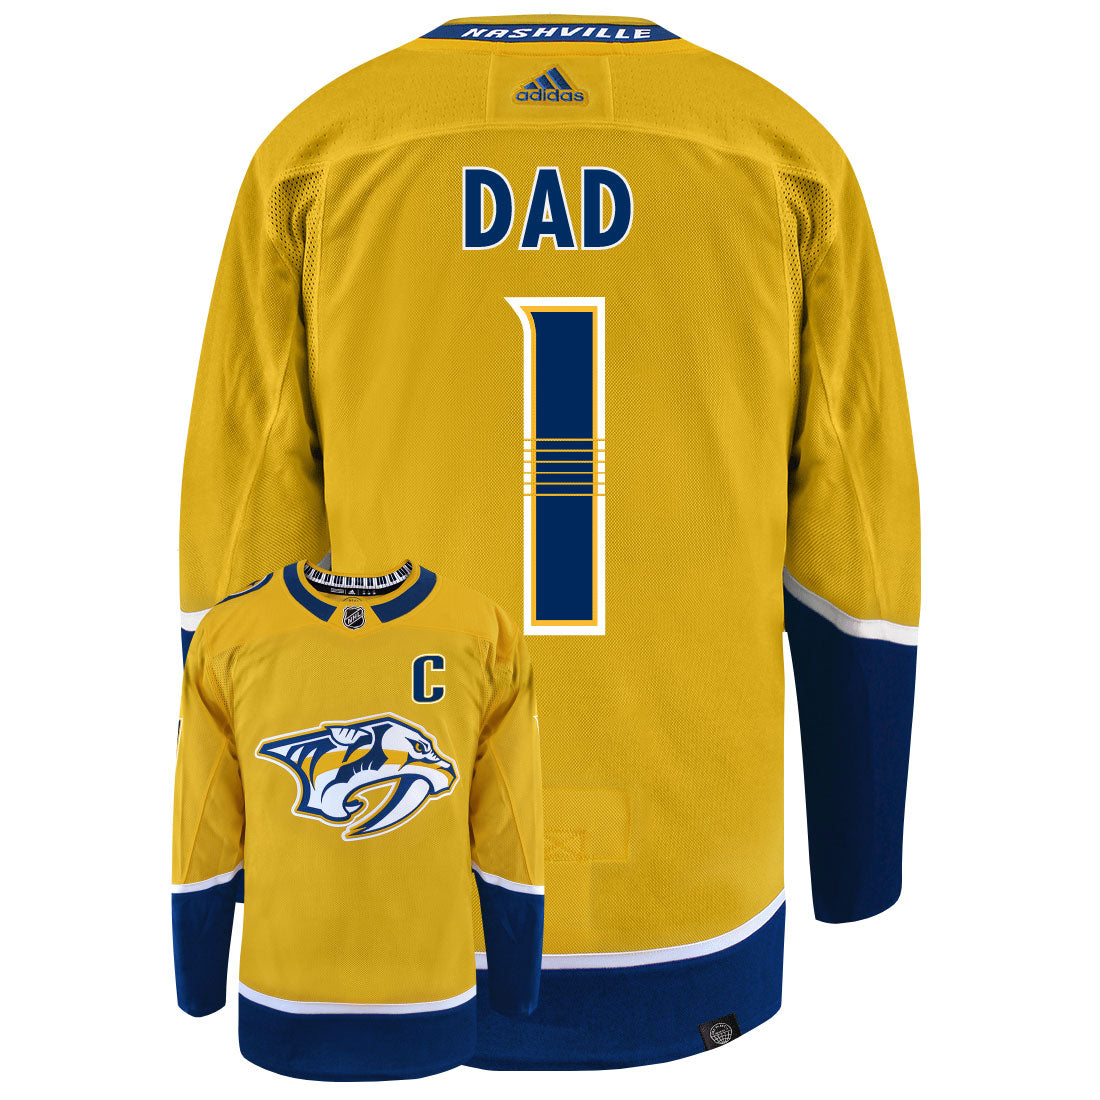 Nashville Predators Dad Number One Adidas Primegreen Authentic NHL Hockey Jersey - Back/Front View